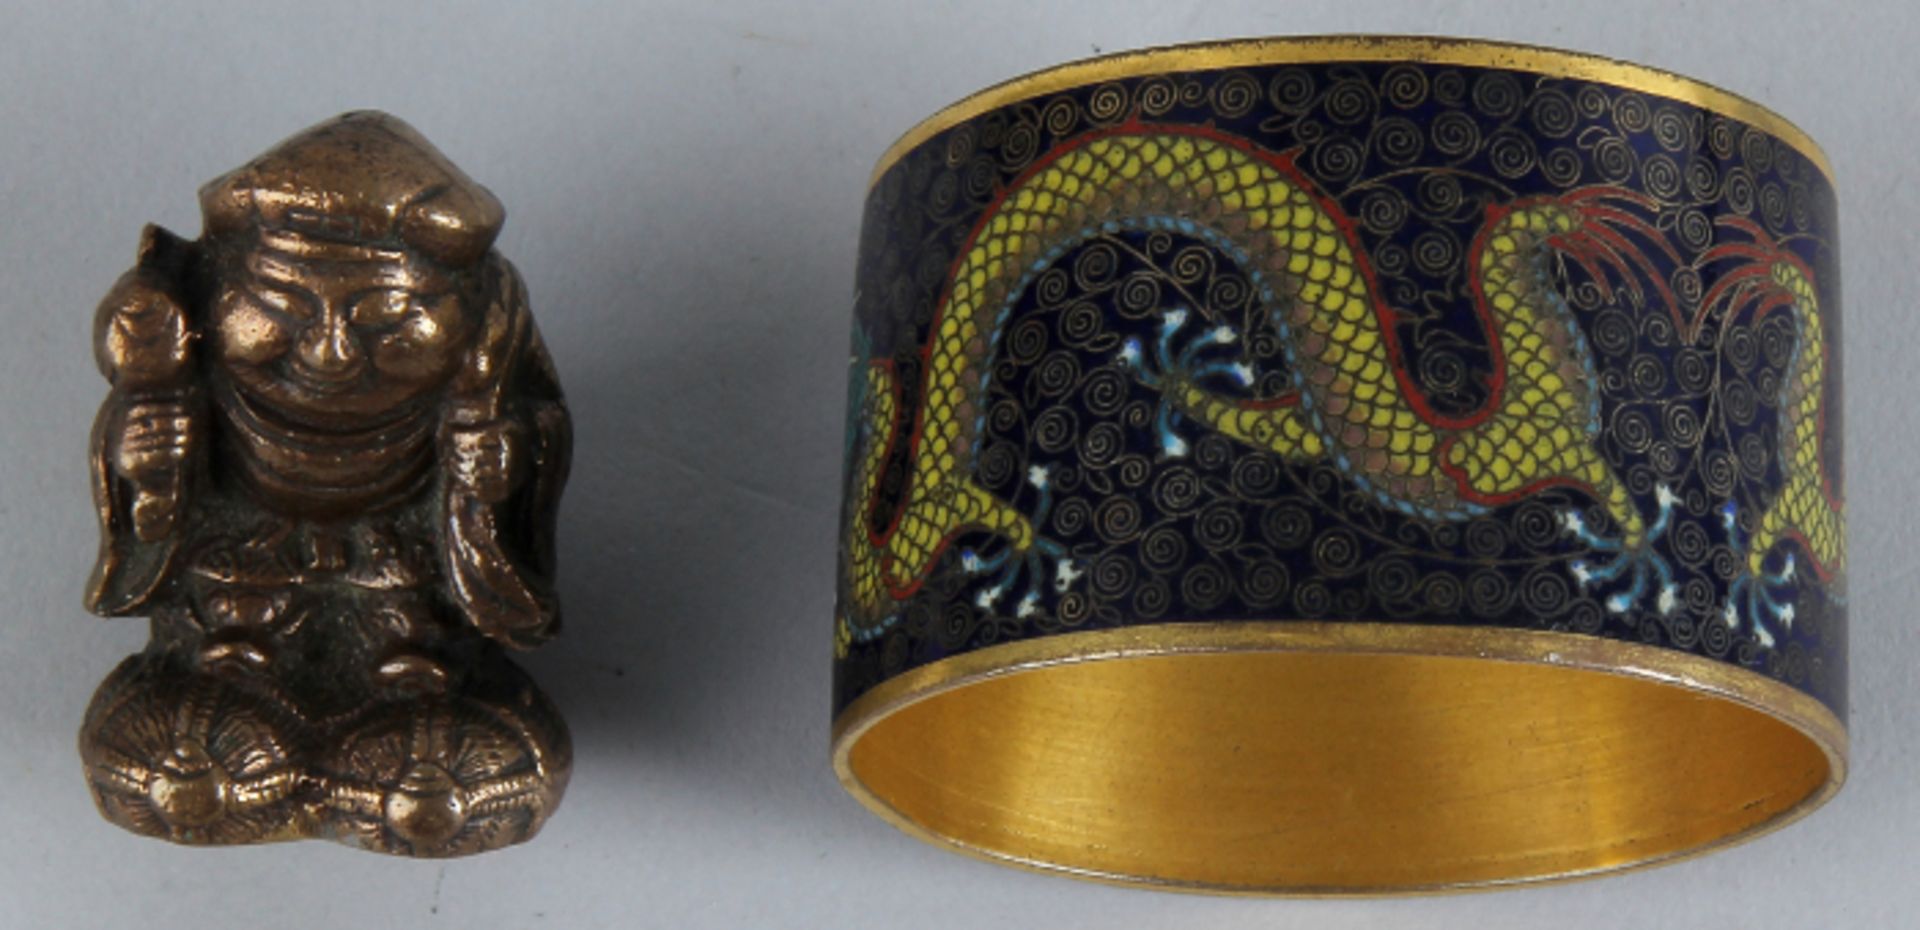 Two antique Chinese objects 1900: 1x napkin ring with cloisonne enamel inlay and dragon motif and 1x